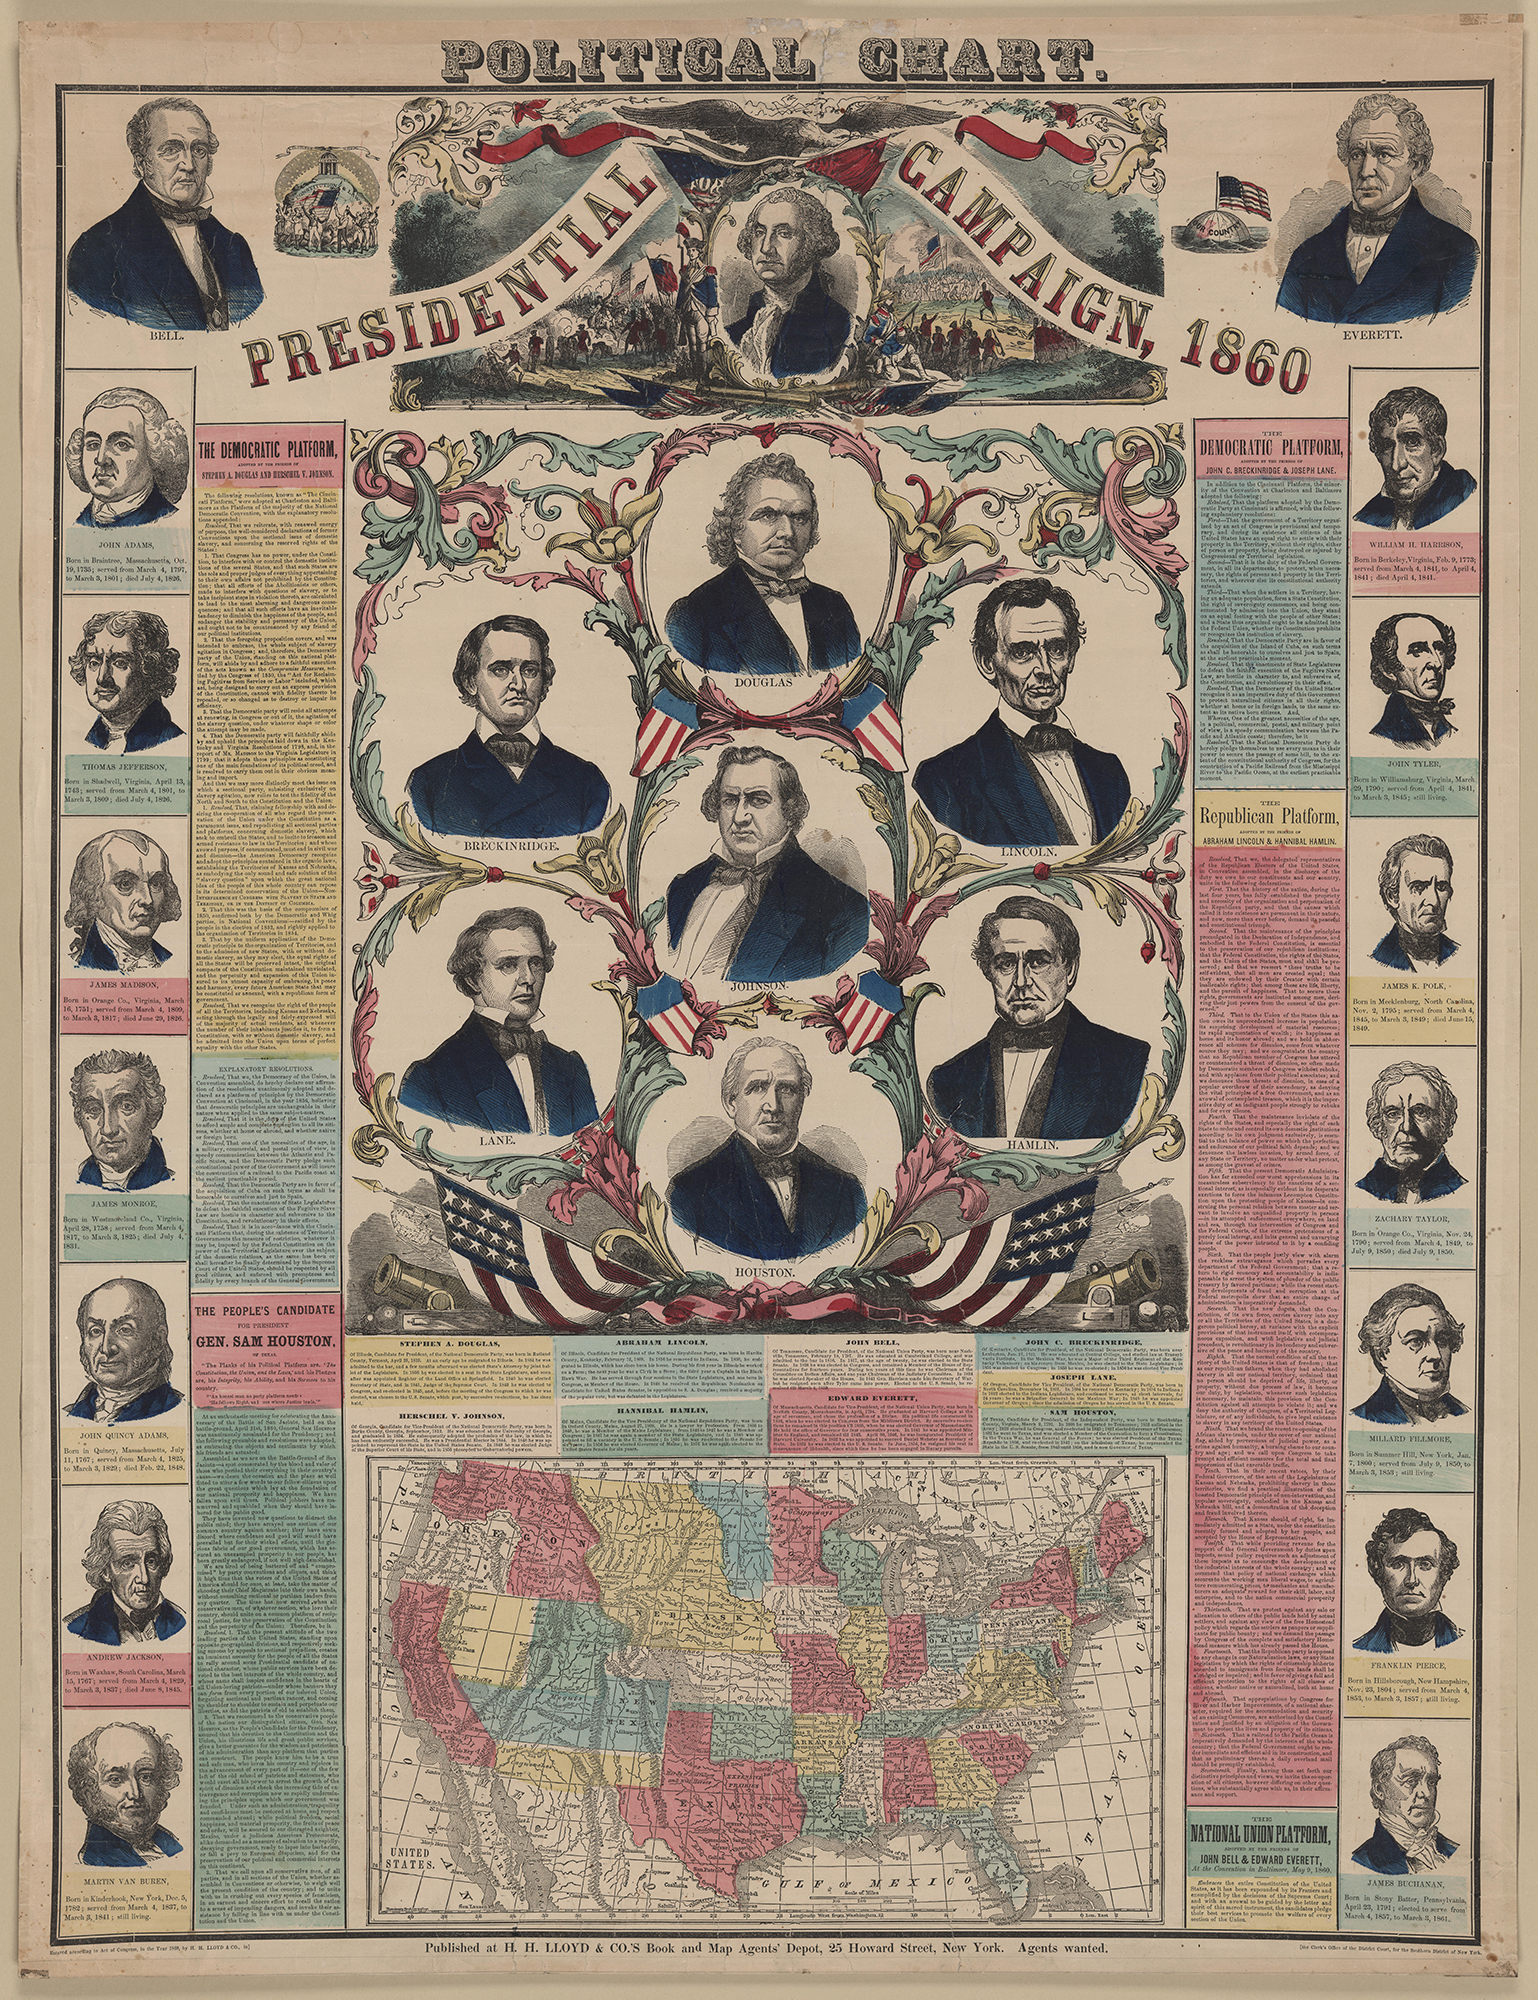 Illustrated, colorized political chart with illustrations of the heads of the candidates along the top and sides of the chart, with a map of the US at the bottom, and small text blurbs about the candidates in between.